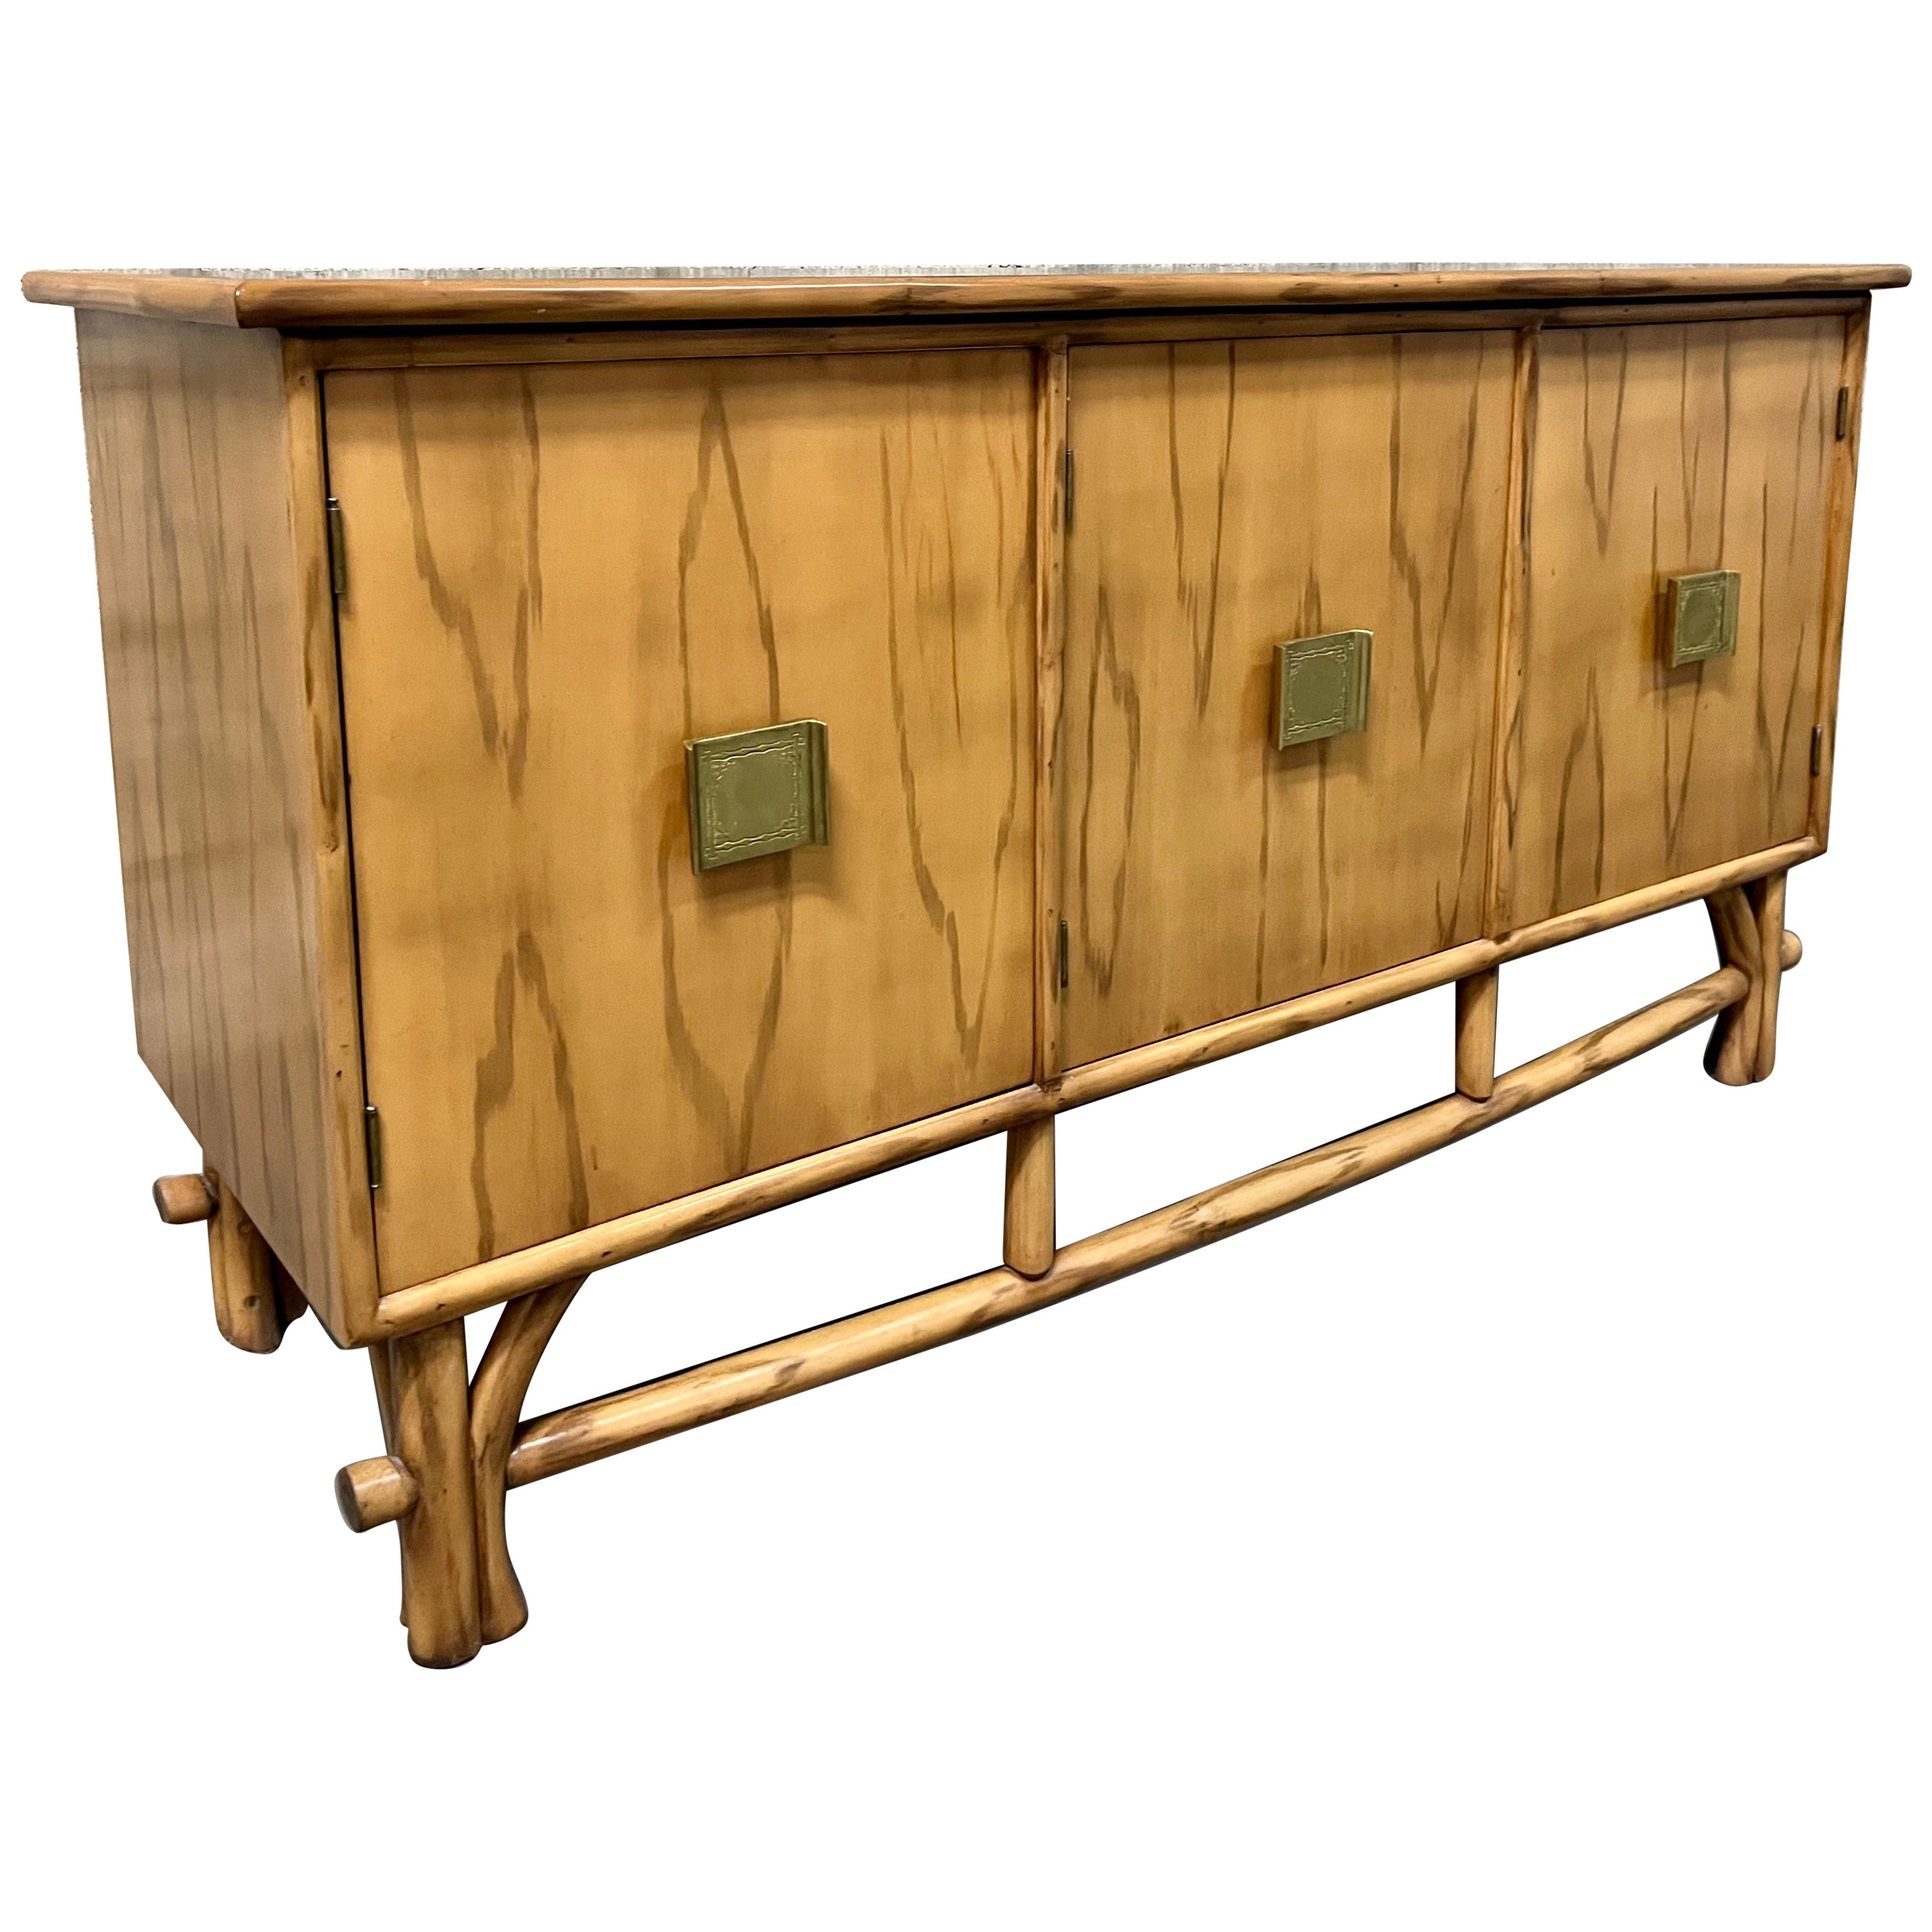 1960s Chinoiserie Inspired Sideboard in the Adrien Audoux & Frida Minet Style